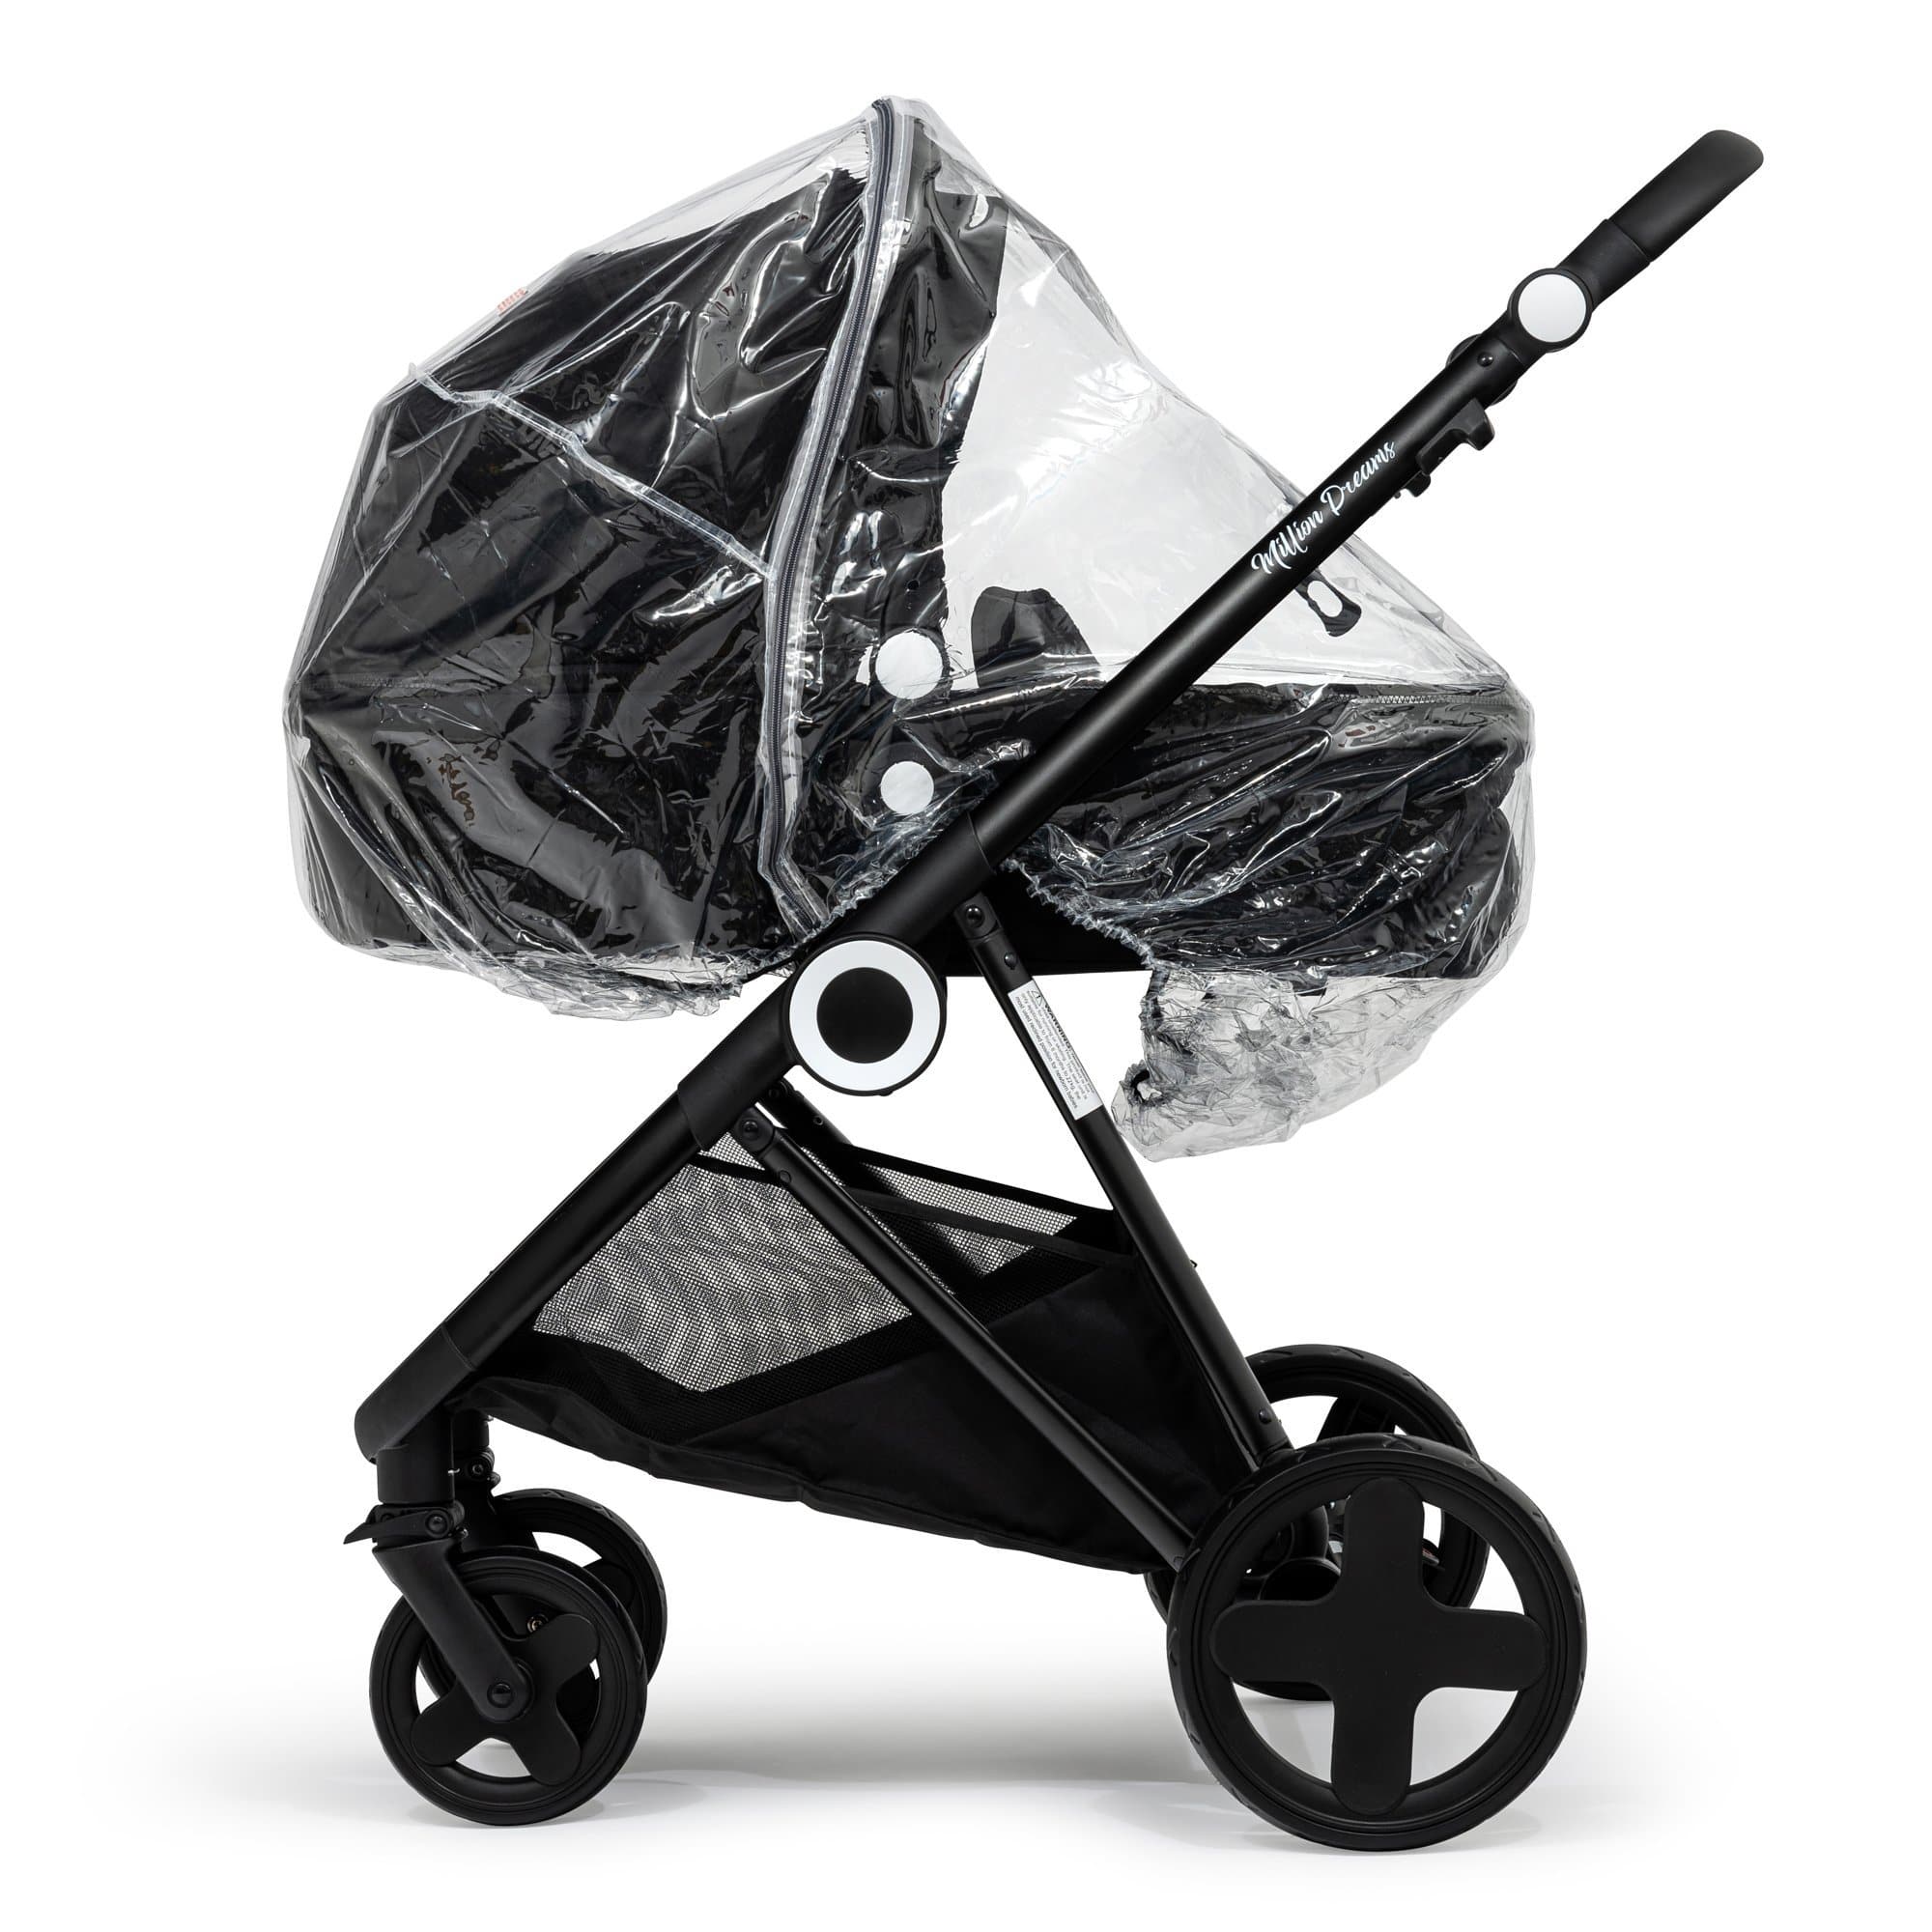 2 in 1 Rain Cover Compatible with Emmaljunga - Fits All Models - For Your Little One